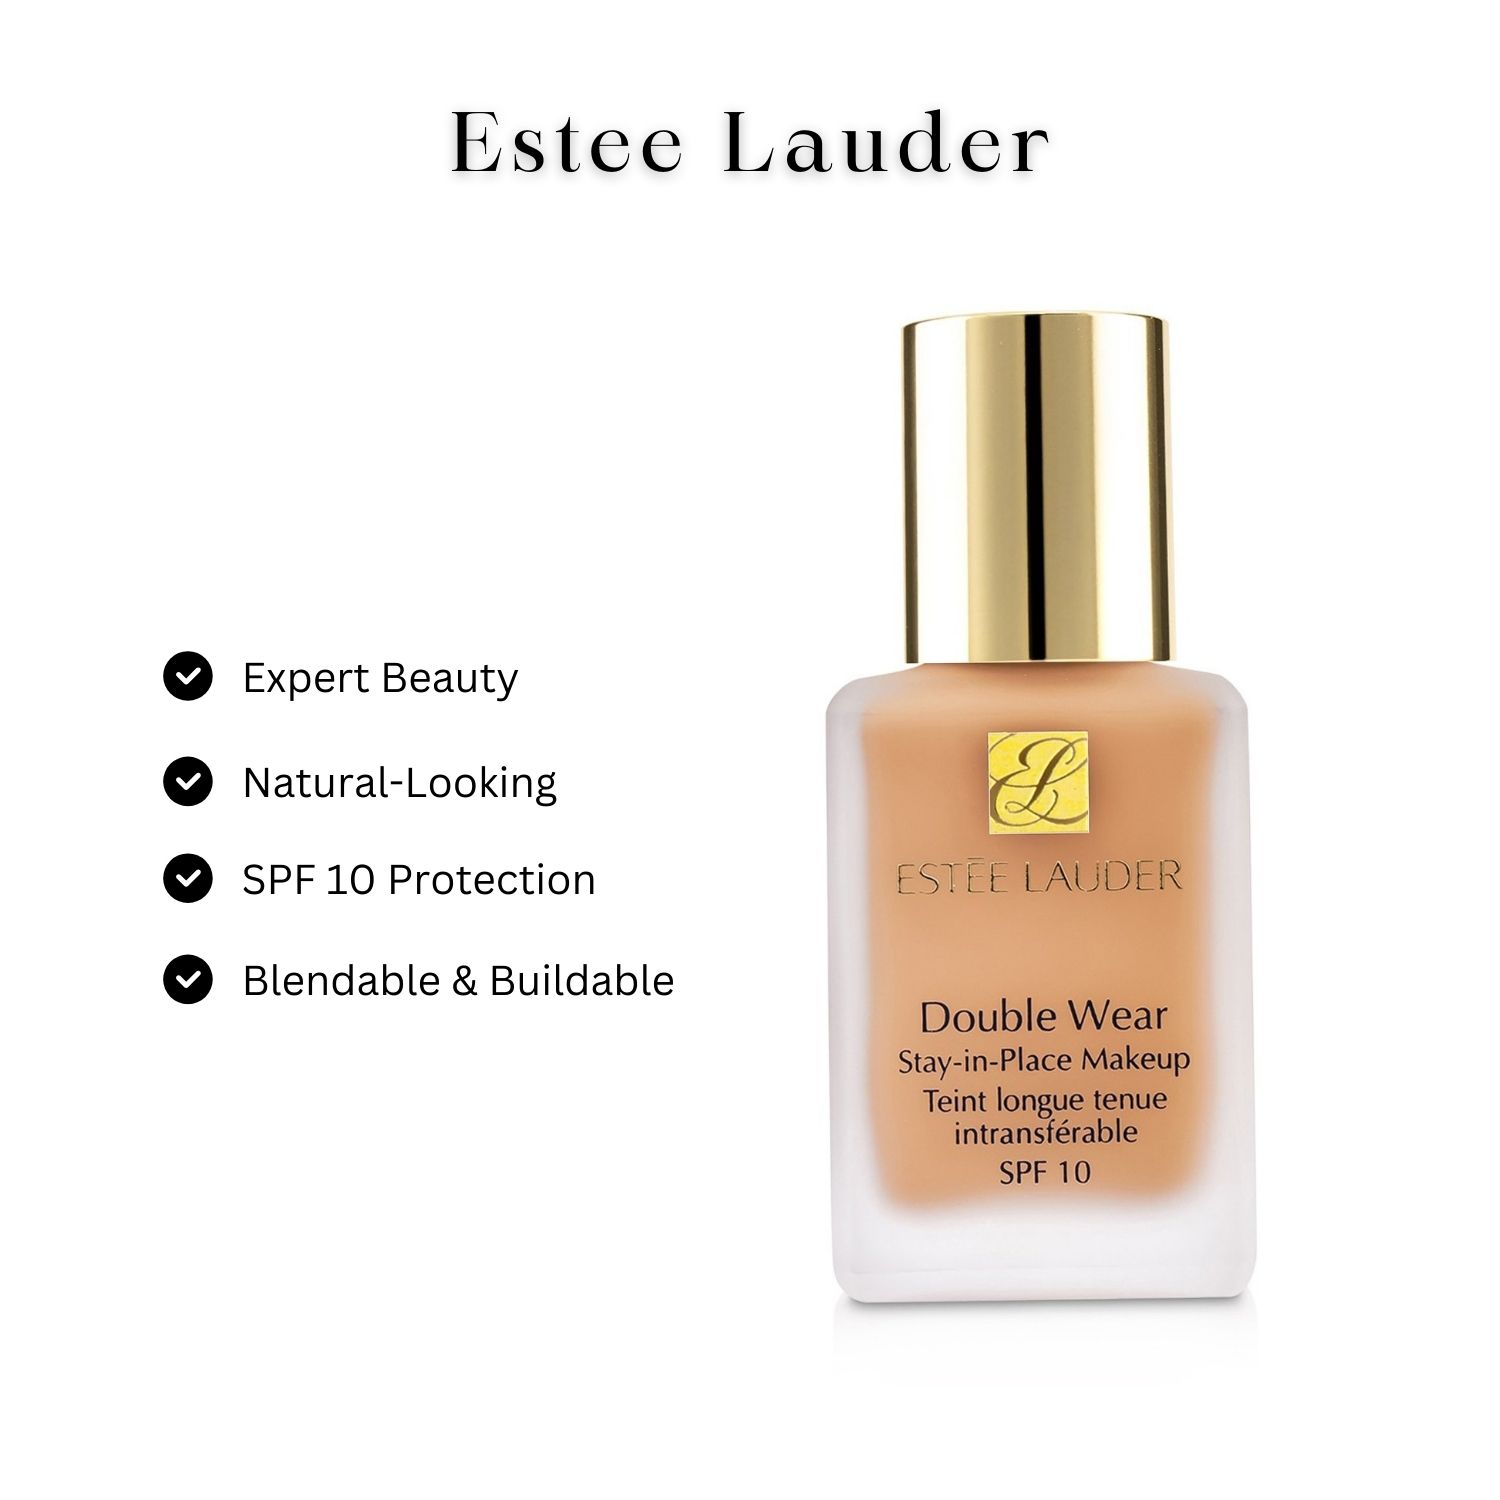 Estee Lauder Double Wear Stay-in Place Makeup Spf 10 - 2c1 Pure Beige 1 oz/30 ml - image 4 of 5